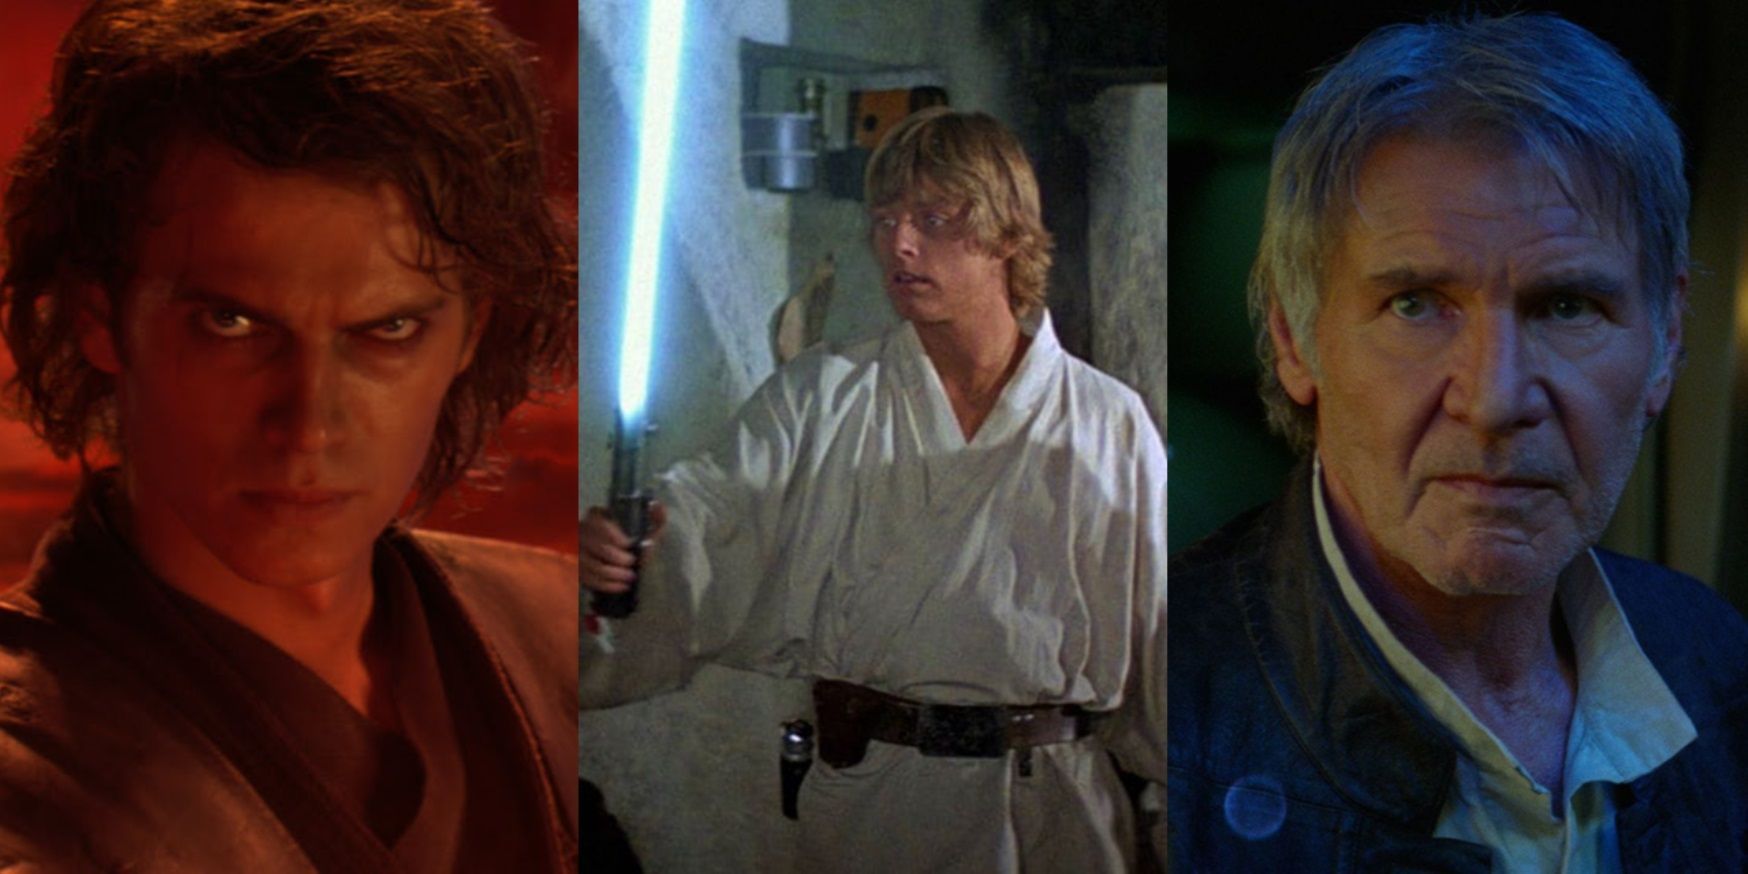 Split image of Anakin in Revenge of the Sith, Luke in Star Wars, and Han in The Force Awakens